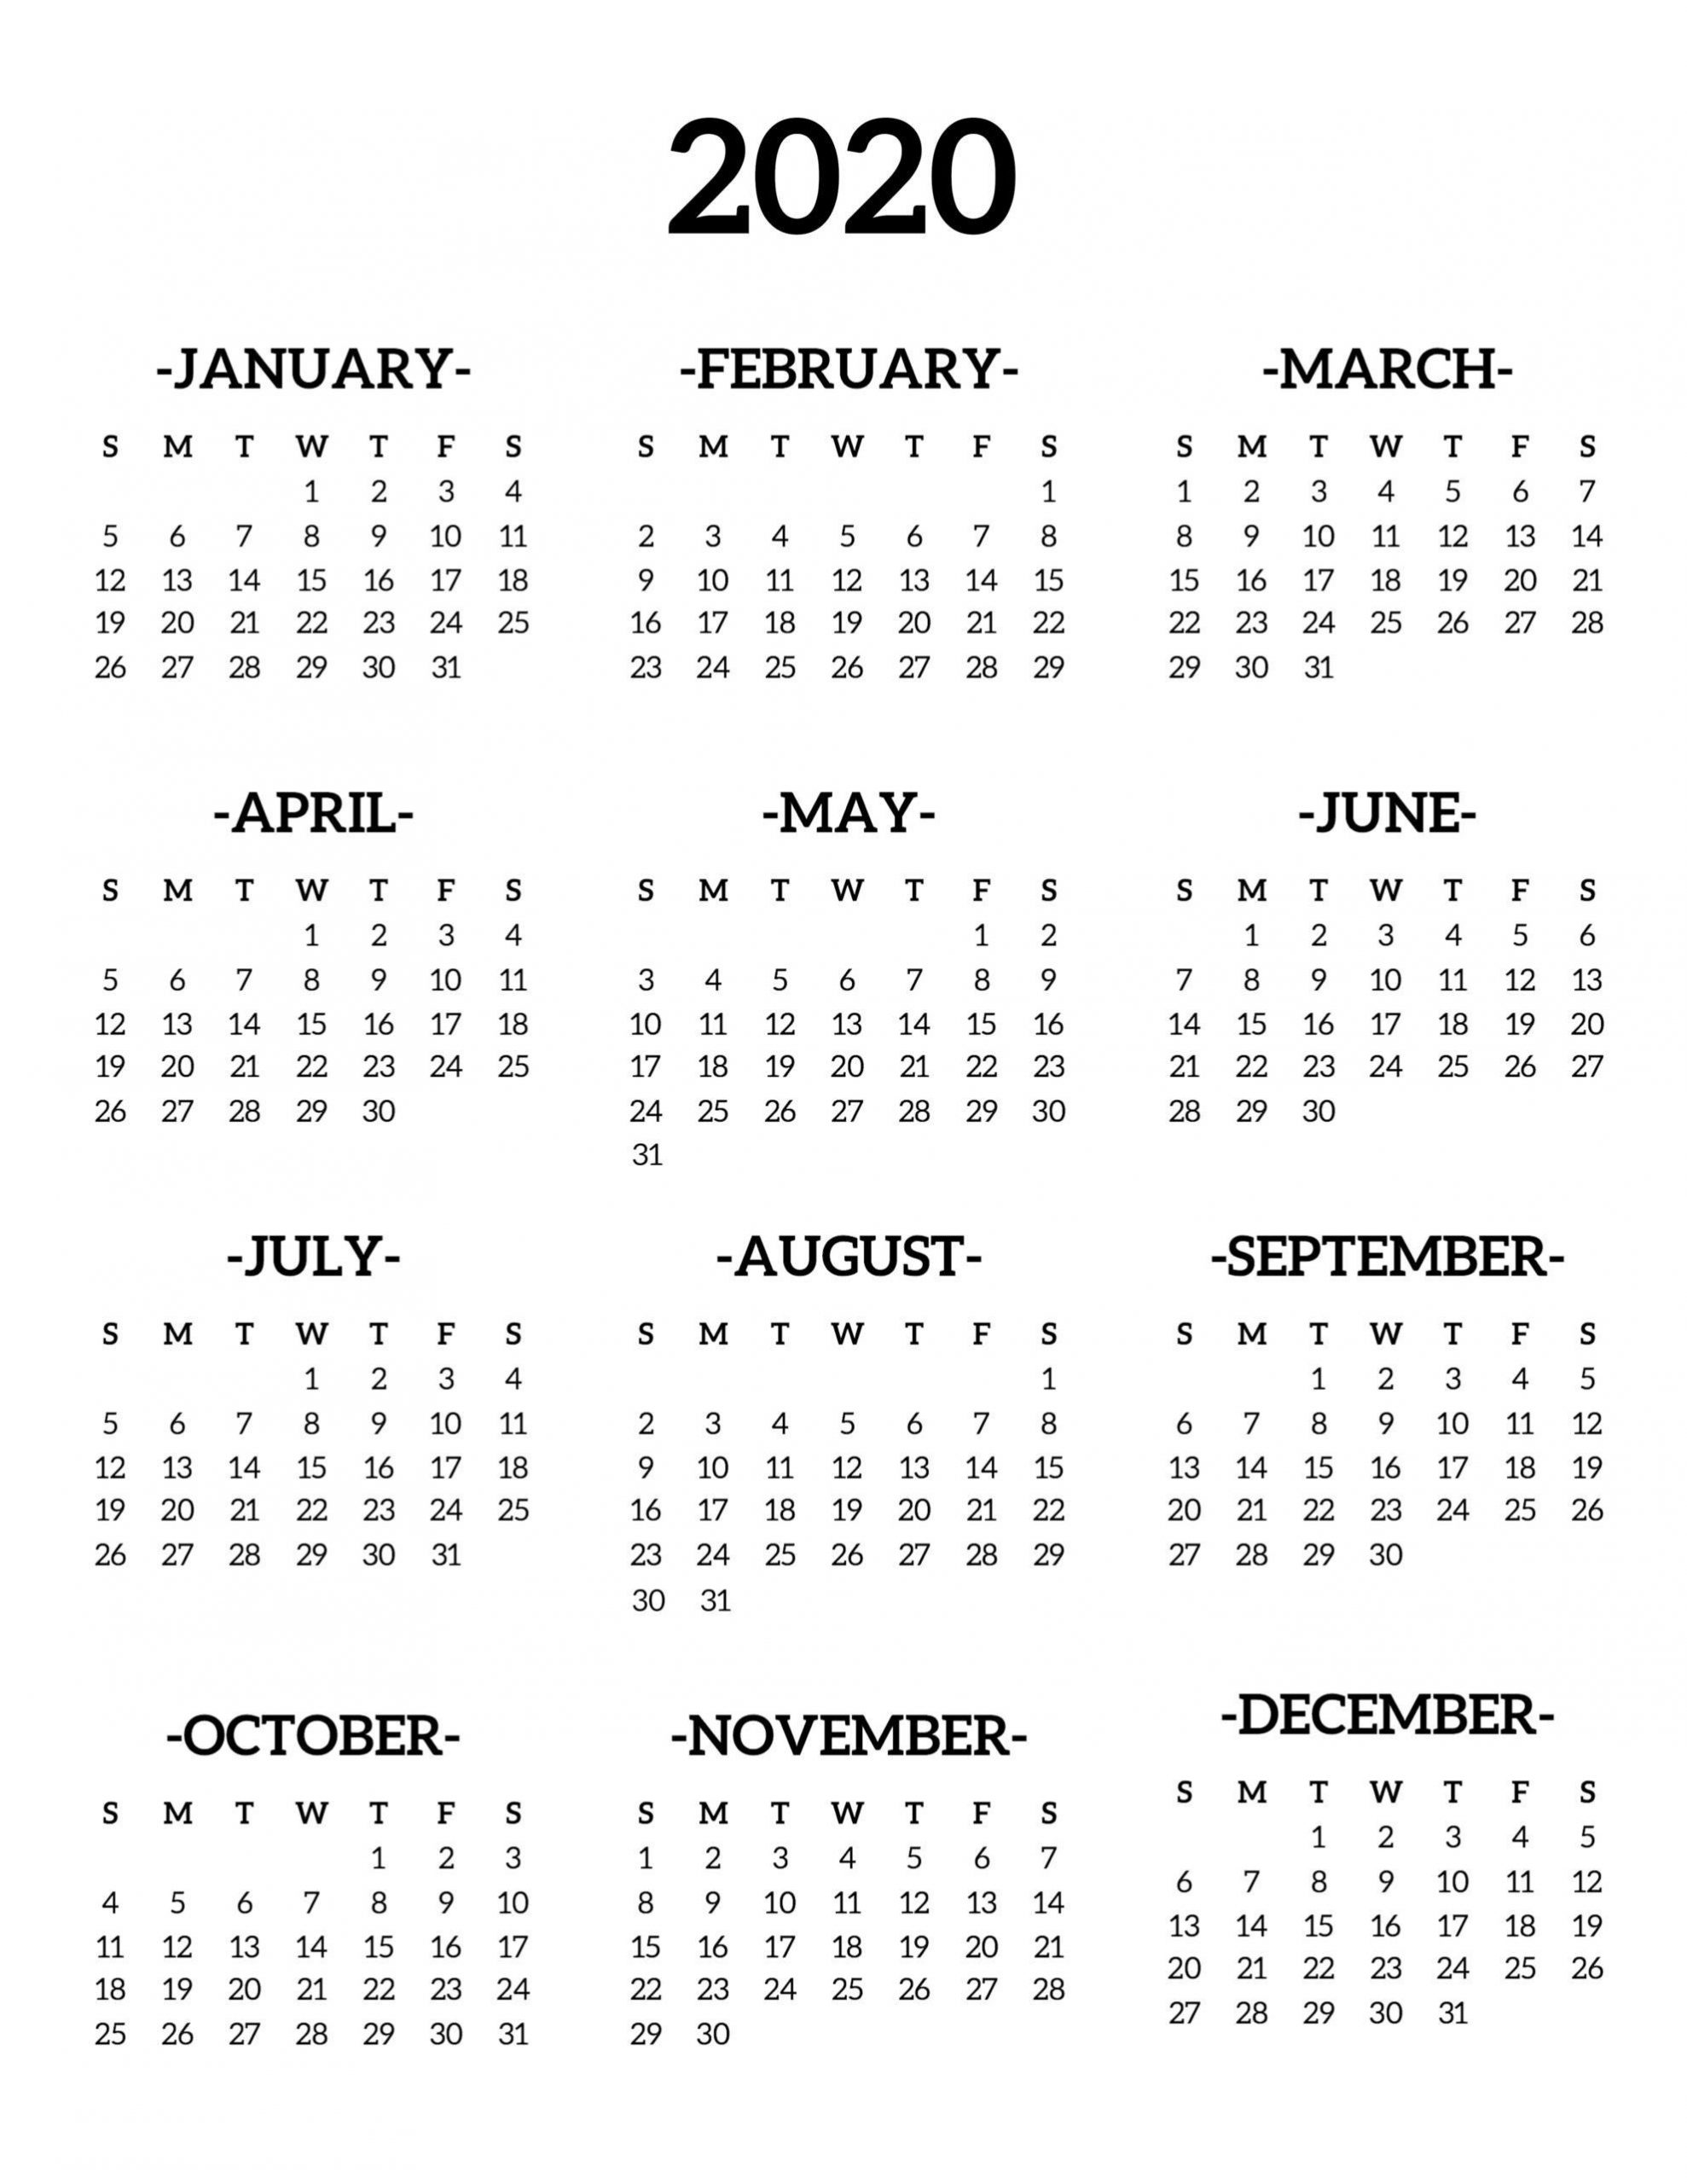 Calendar 2020 Printable E Page Paper Trail Design Free Blank in 2020 Year At A Glance Download